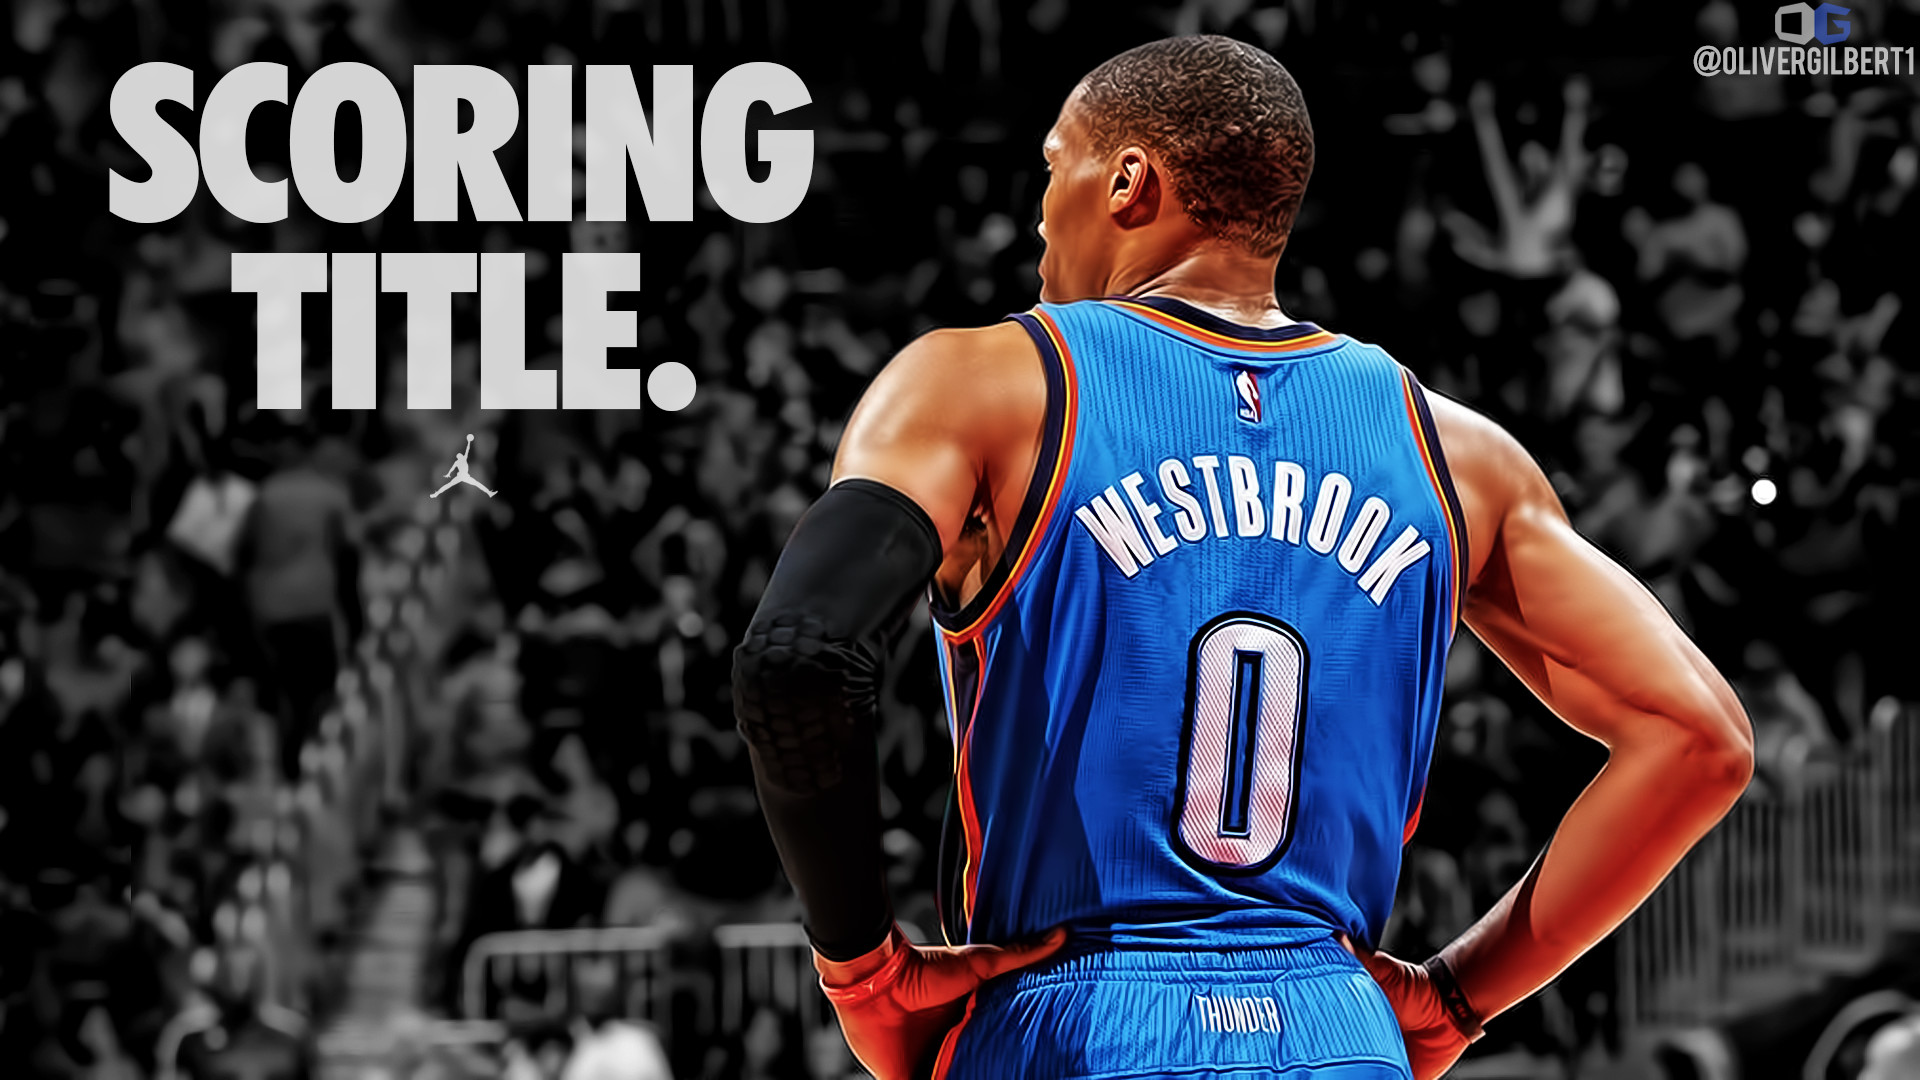 1920x1080 Russell Westbrook Scoring Title by Hecziaa Russell Westbrook Scoring Title  by Hecziaa